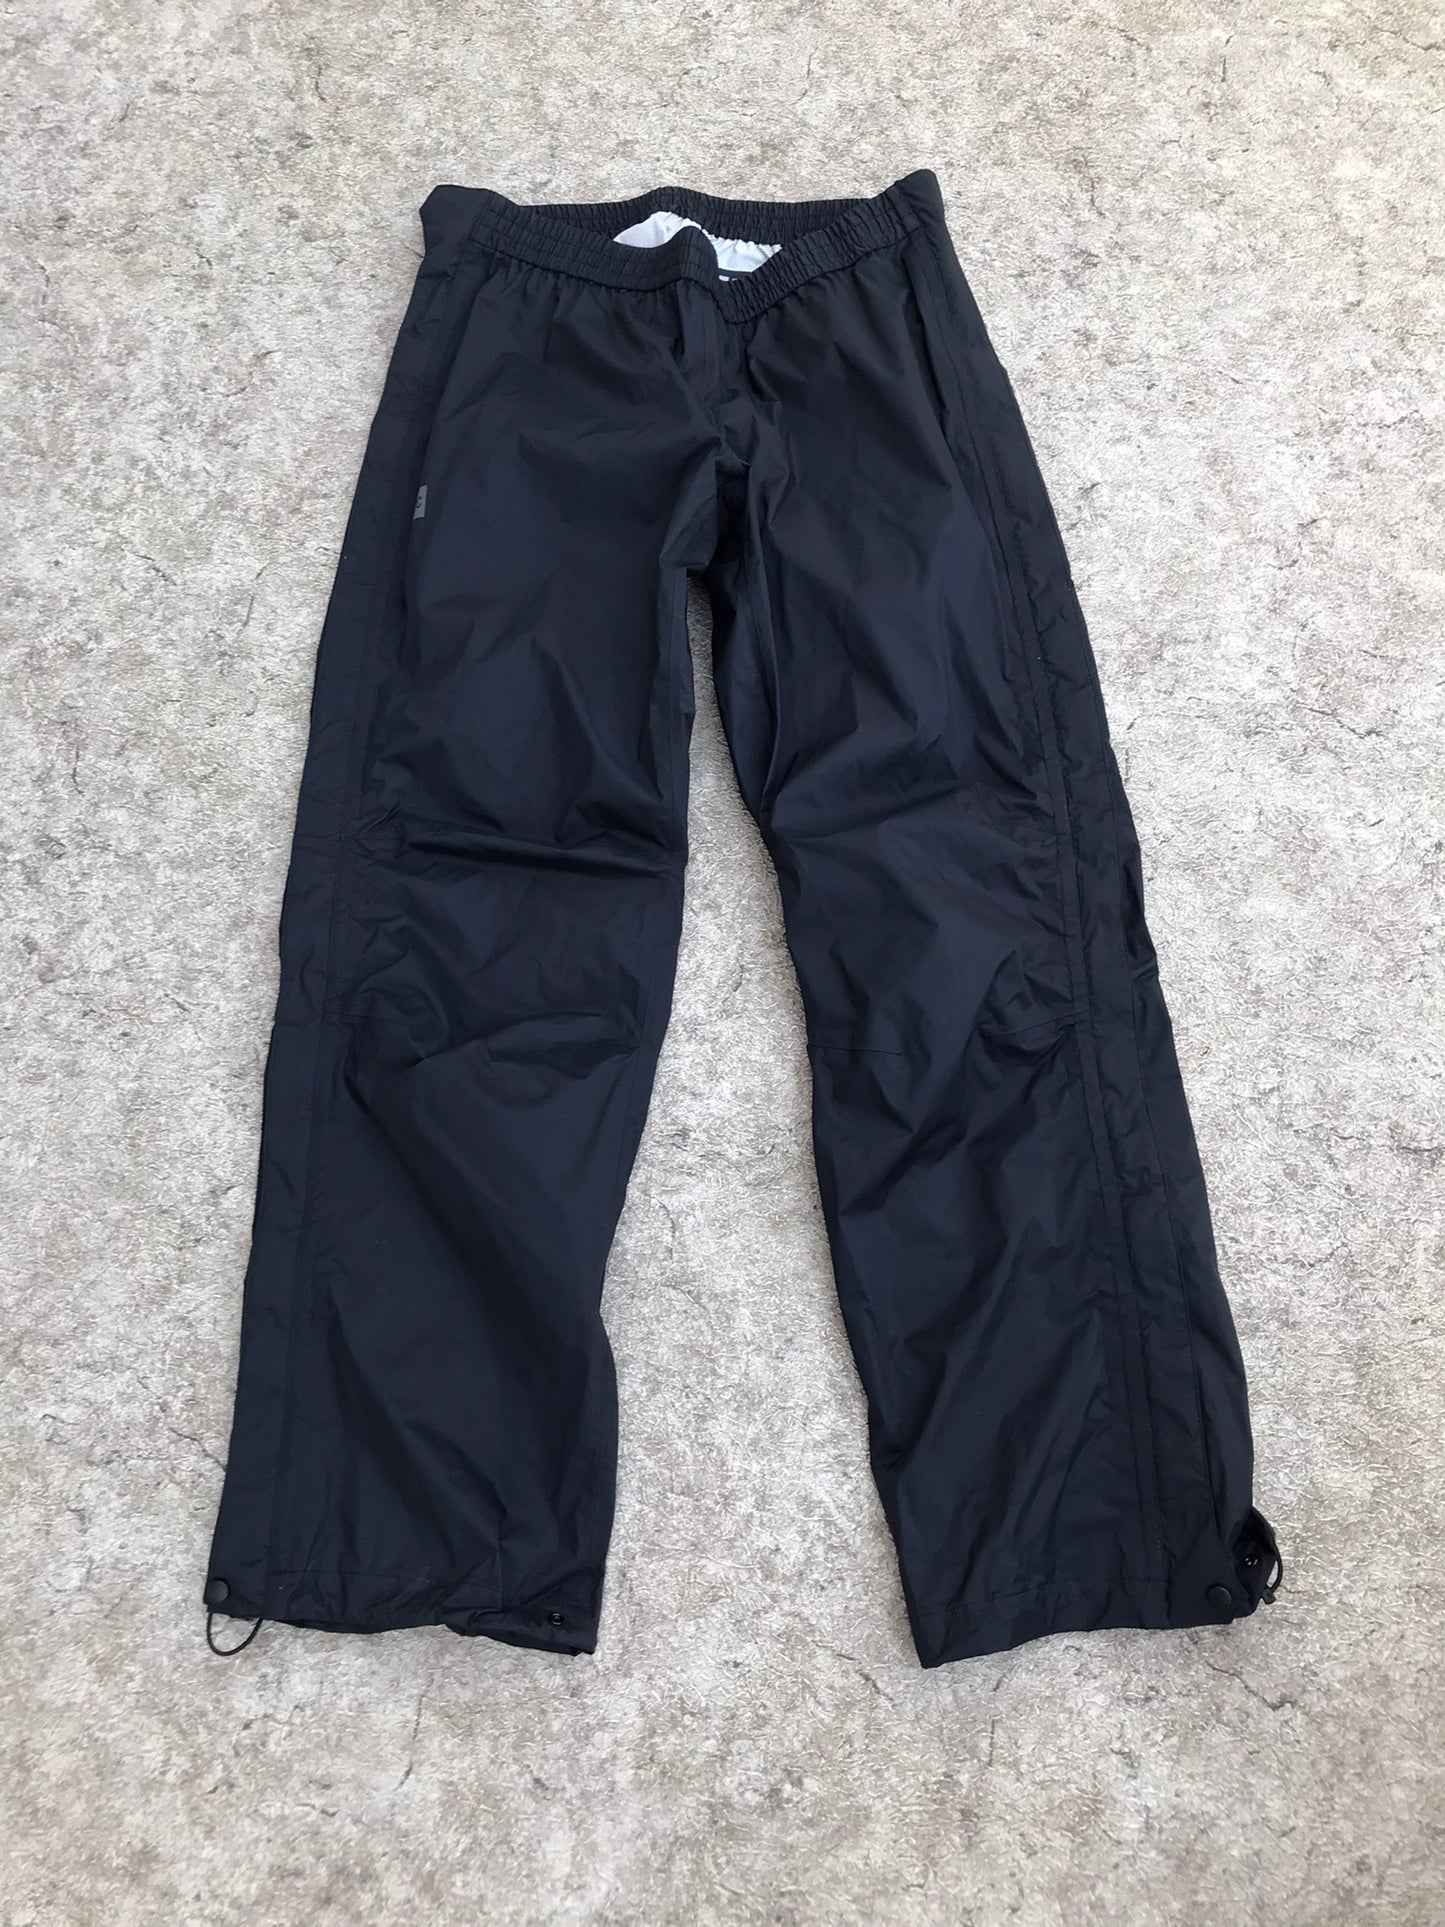 Rain Pants Ladies Size Large MEC Black Waterproof With Full Zippers Up Each Side Great For Hikes, Bikes, Motorcycles, New Demo Model